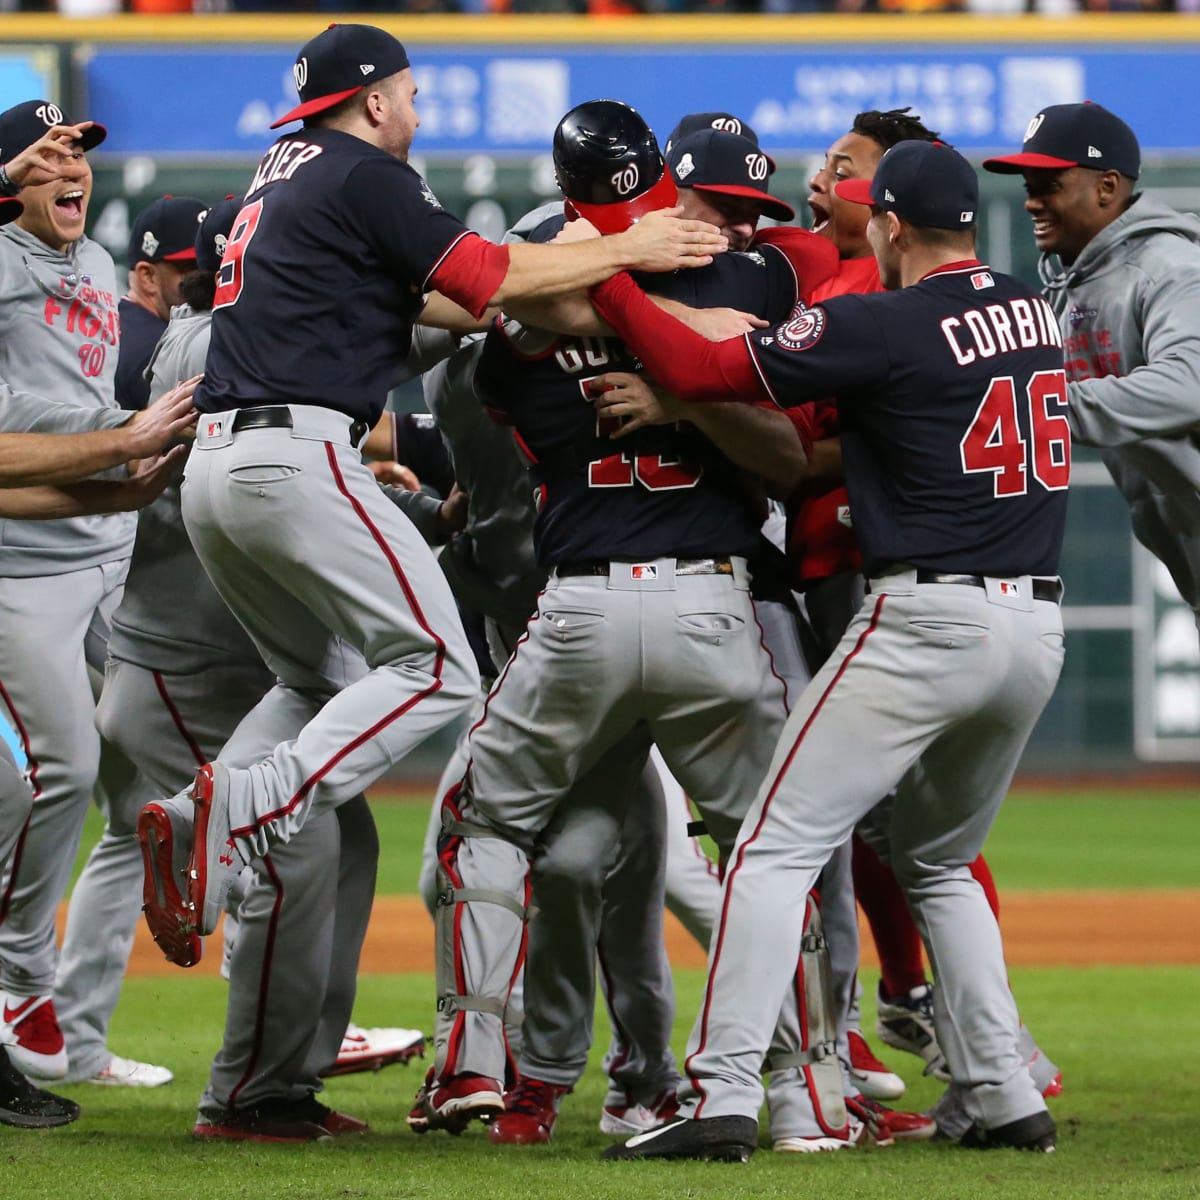 Chicago braced for possible World Series defeat to Cleveland